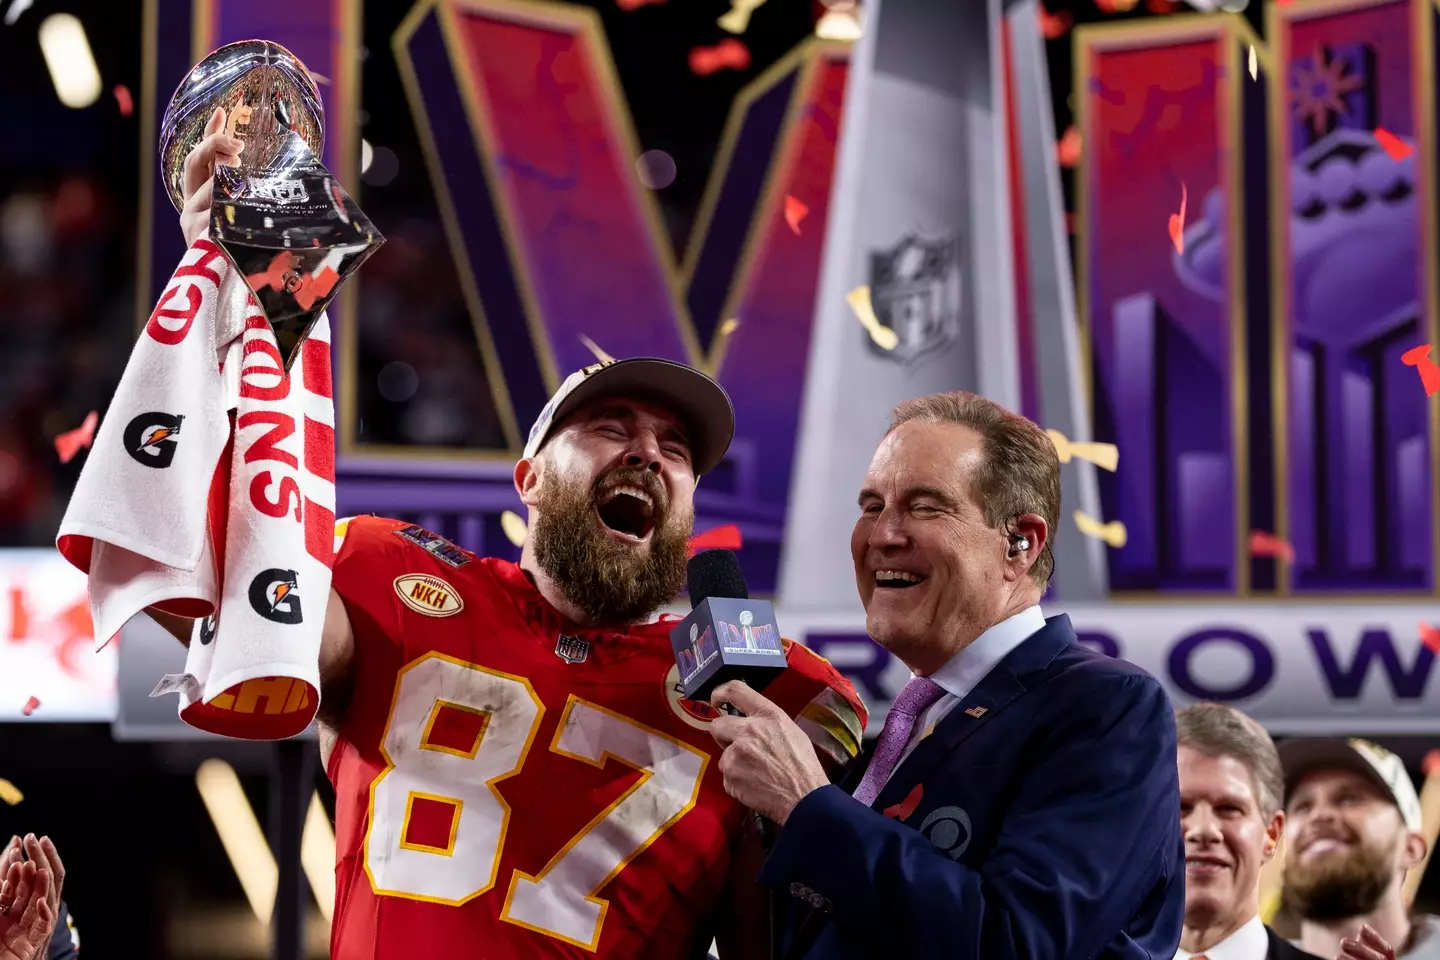 Kelce belts out Viva Las Vegas after the victory.